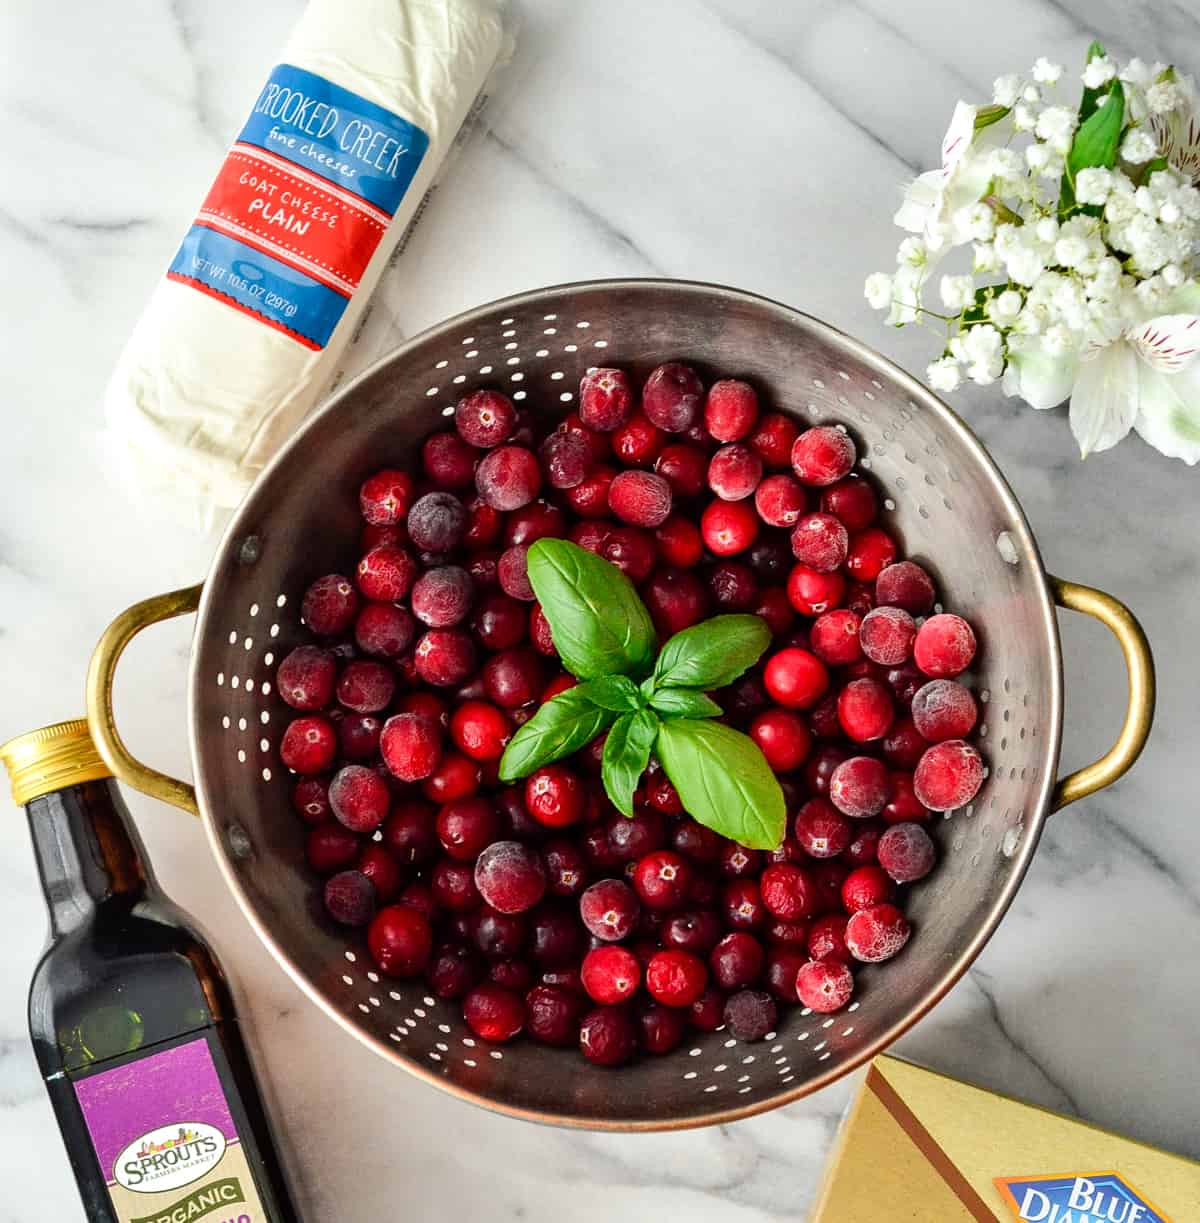 ingredients in this Cranberry Goat Cheese Appetizer recipe